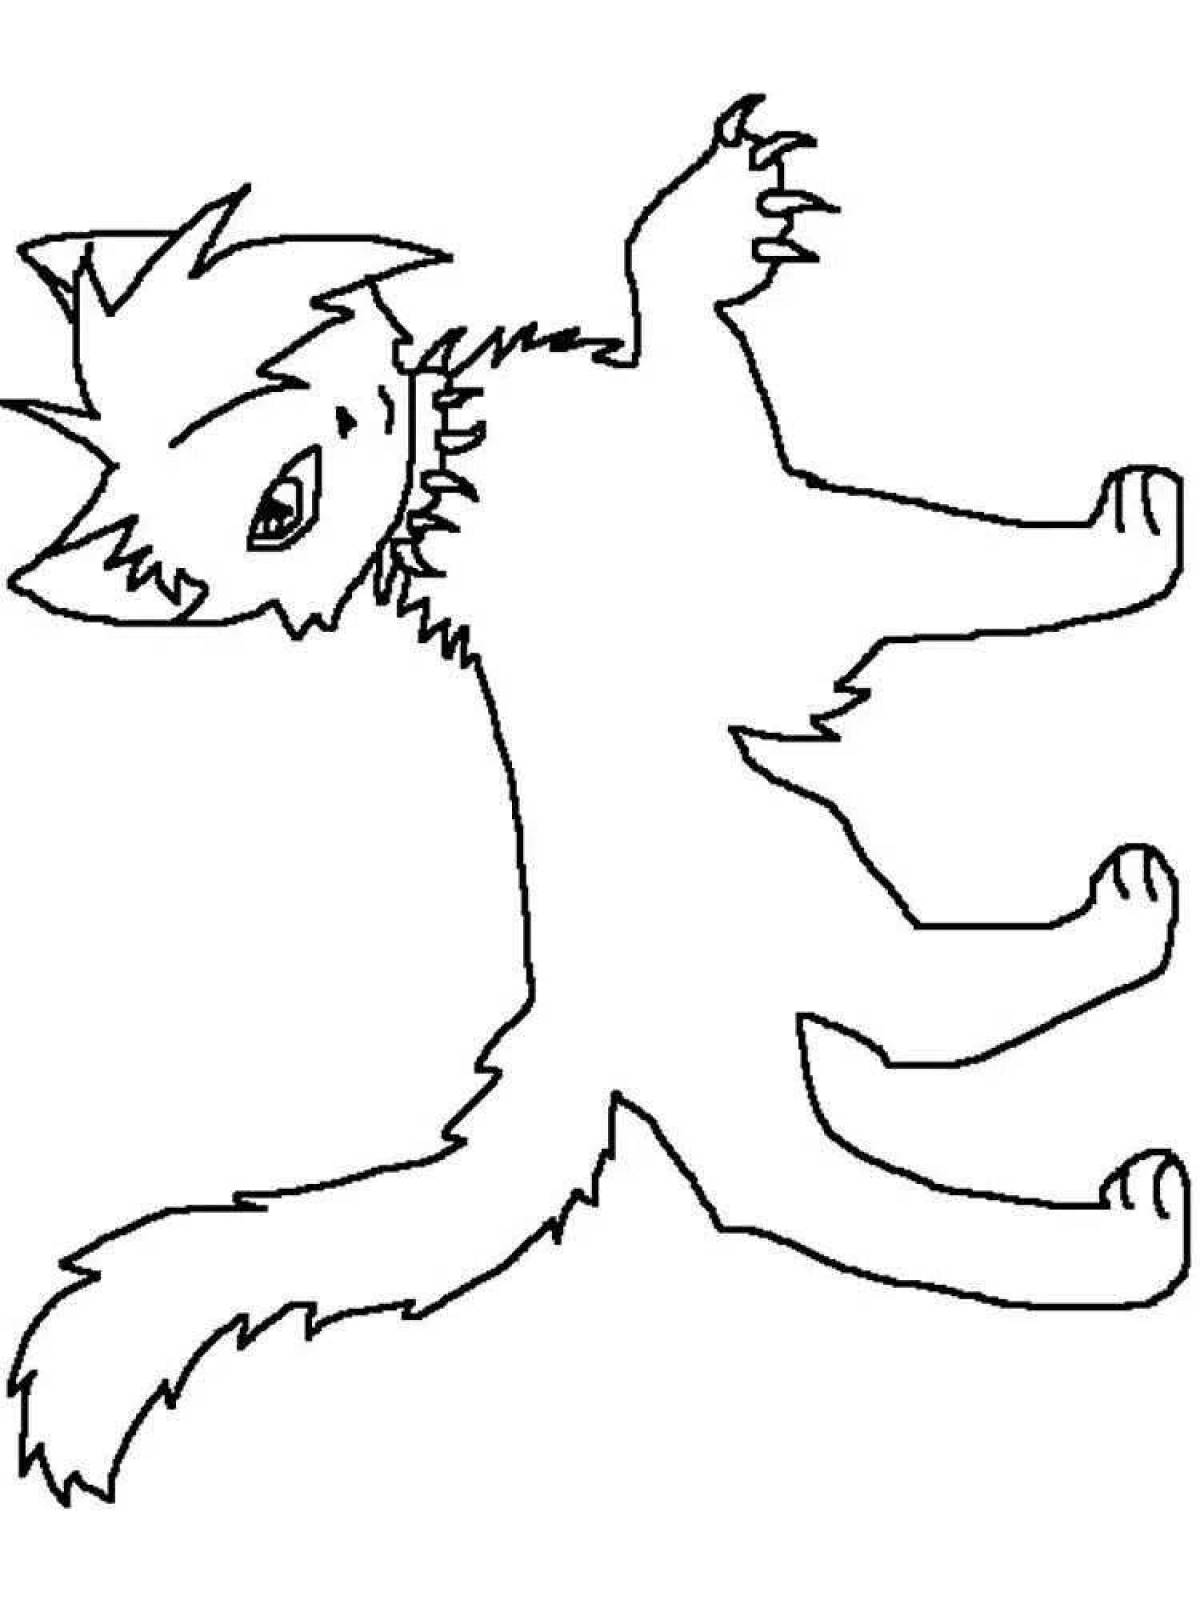 Awesome warrior cats scourge coloring page